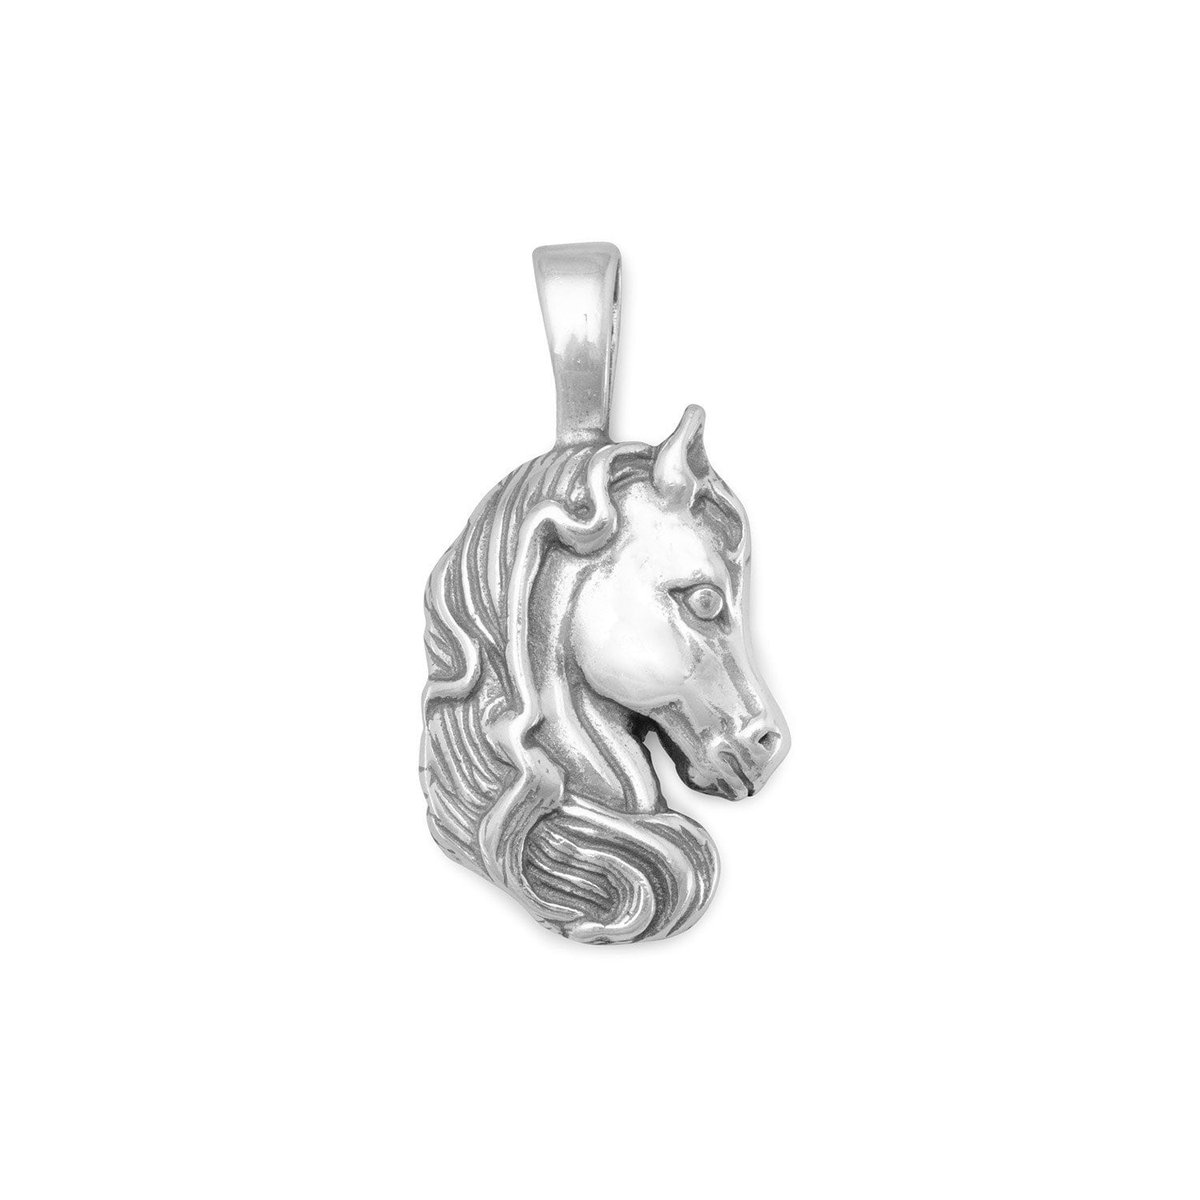 Horse Head Pendant ~ Gift Pendant For Equestrians ~ Pendant For Horse Lovers ~ Horse with Mane Pendant ~ Gift For Her ~ Cowgirl Pendant tuppu.net/351cb8aa #jewelrymandave #Etsy #925SilverPendant